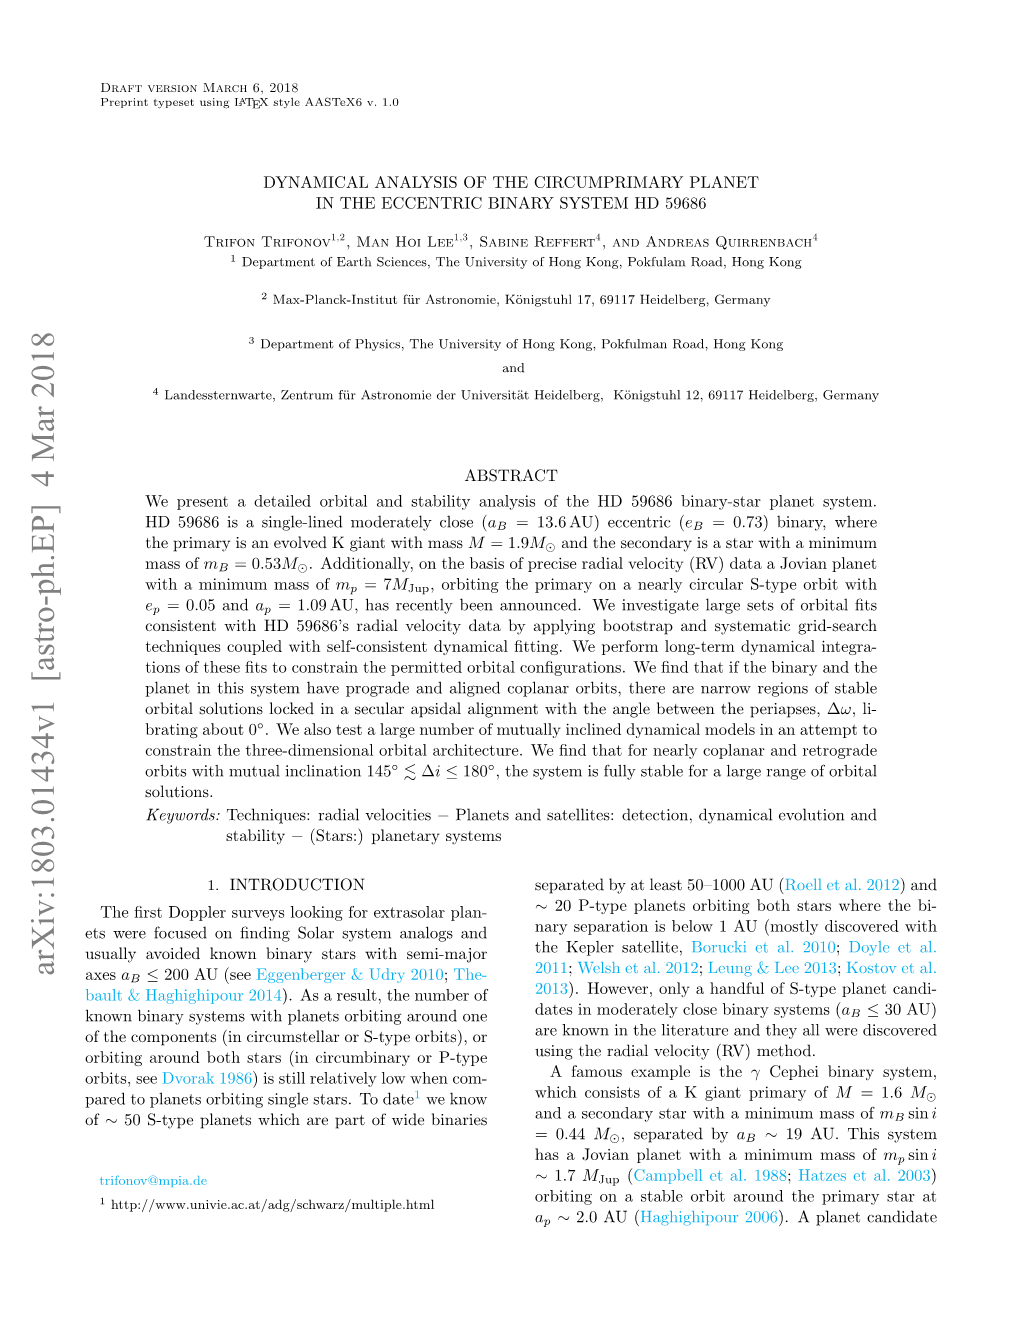 Dynamical Analysis of the Circumprimary Planet in the Eccentric Binary System Hd 59686